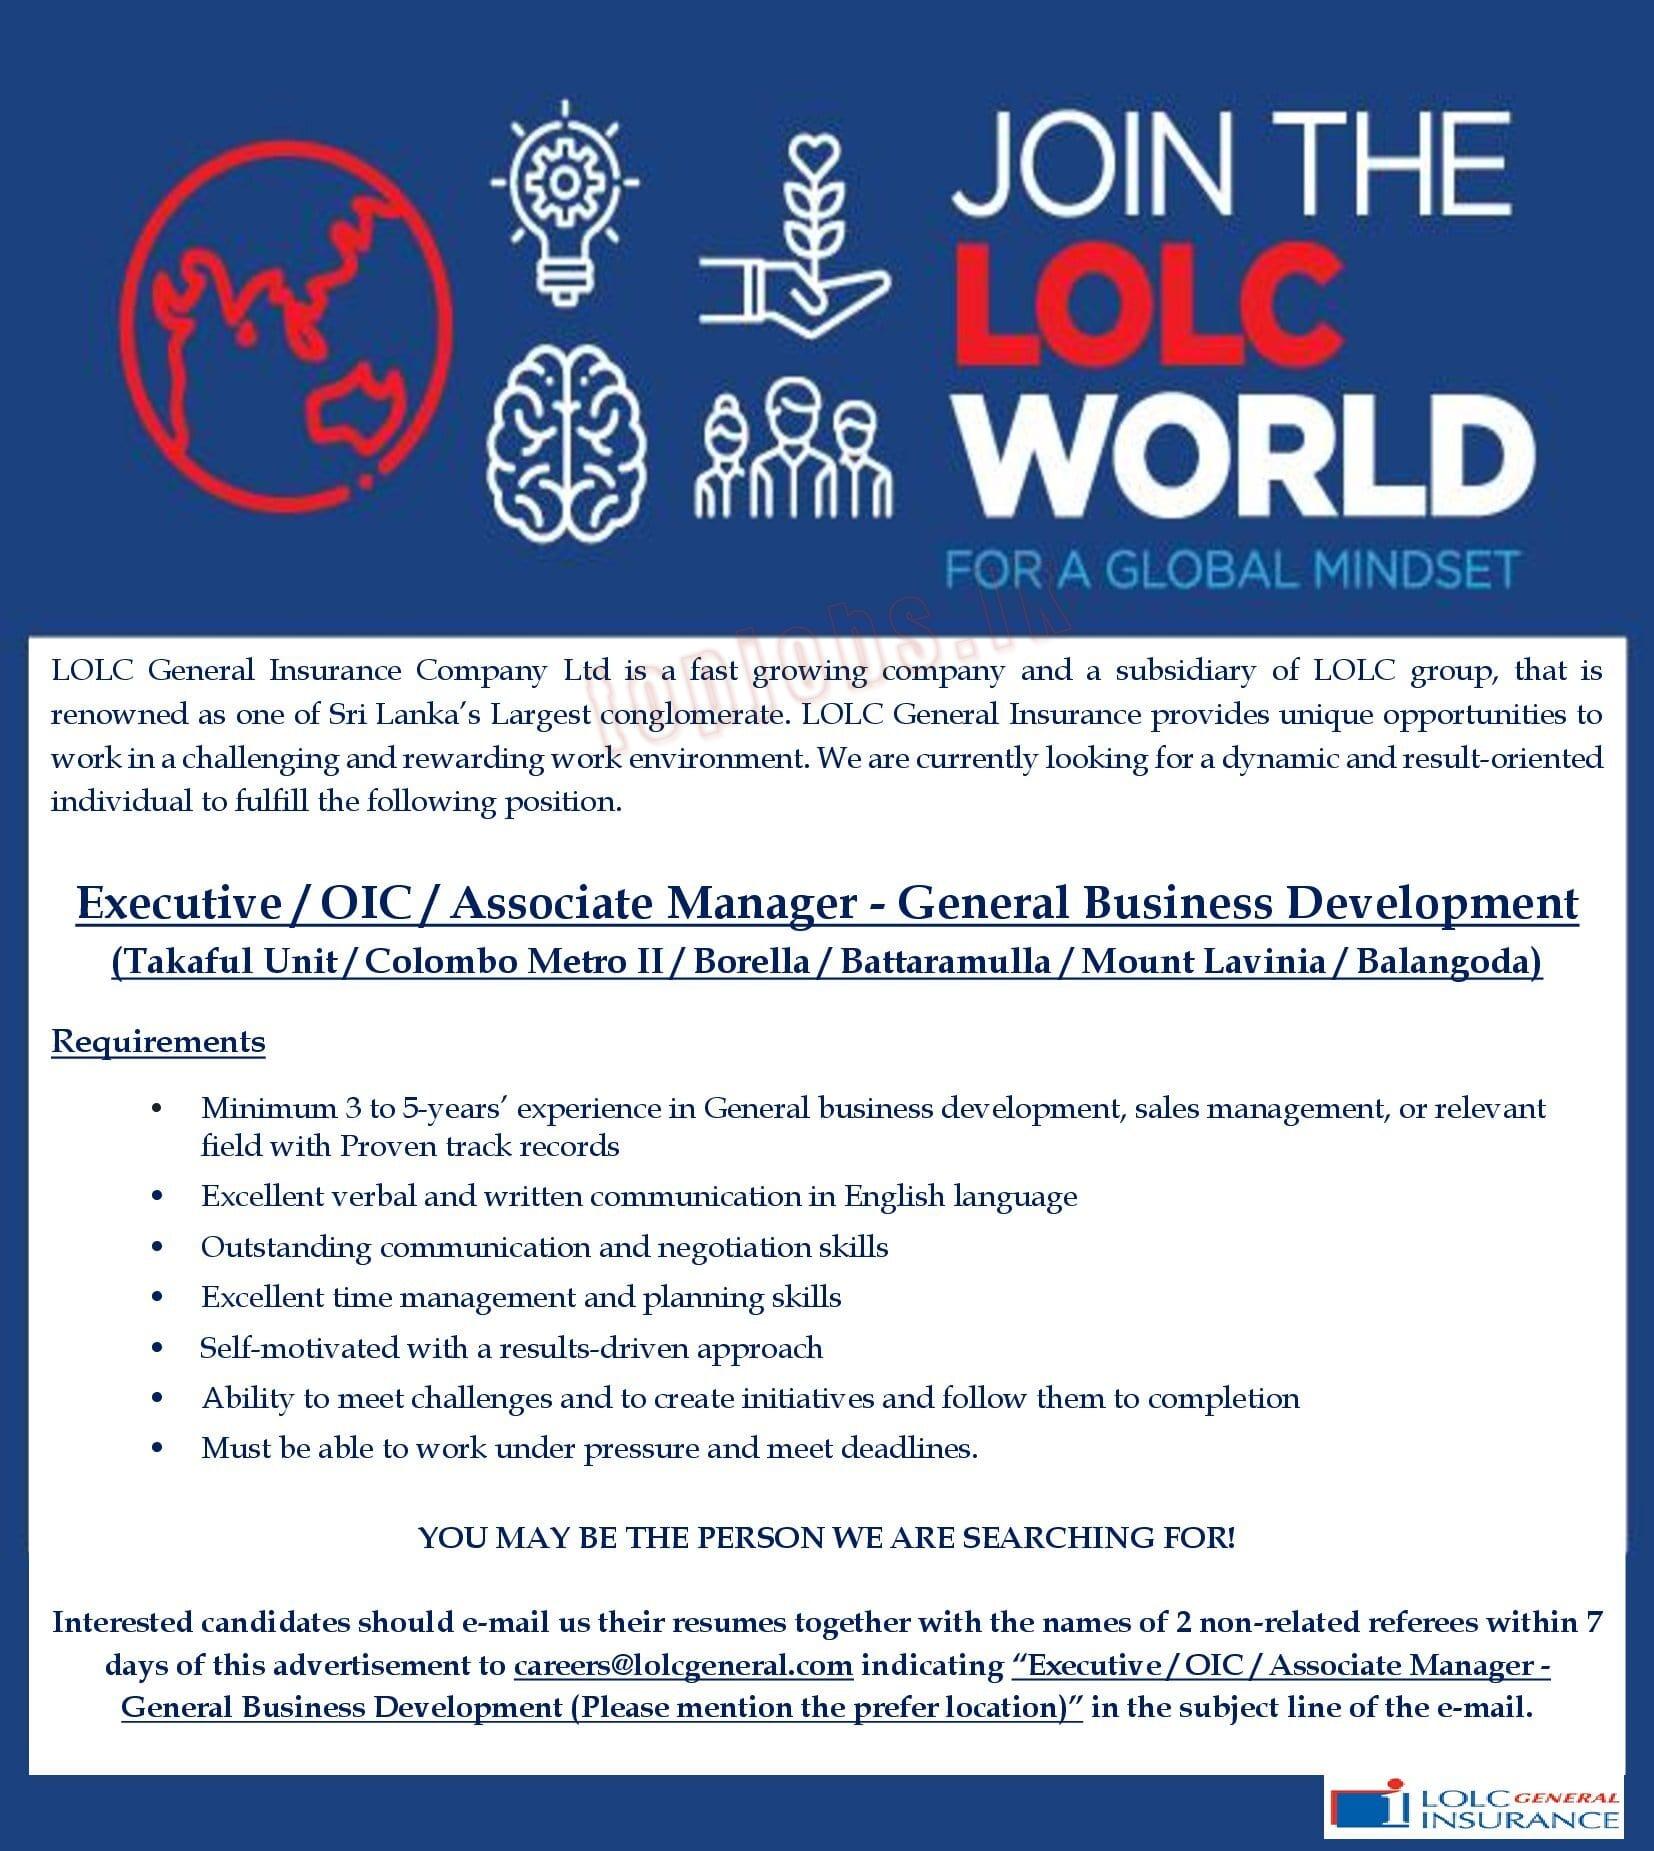 Executive / OIC / Associate Manager Vacancies in LOLC Holdings